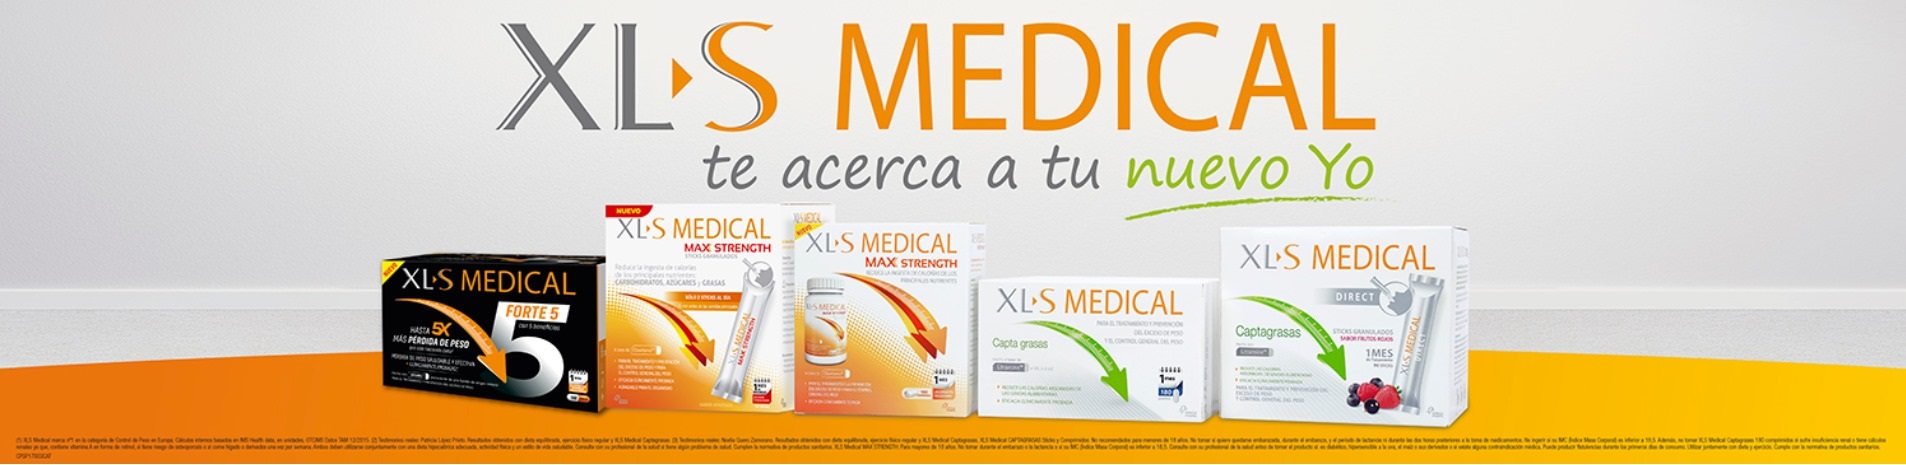 XLS MEDICAL Perdere peso